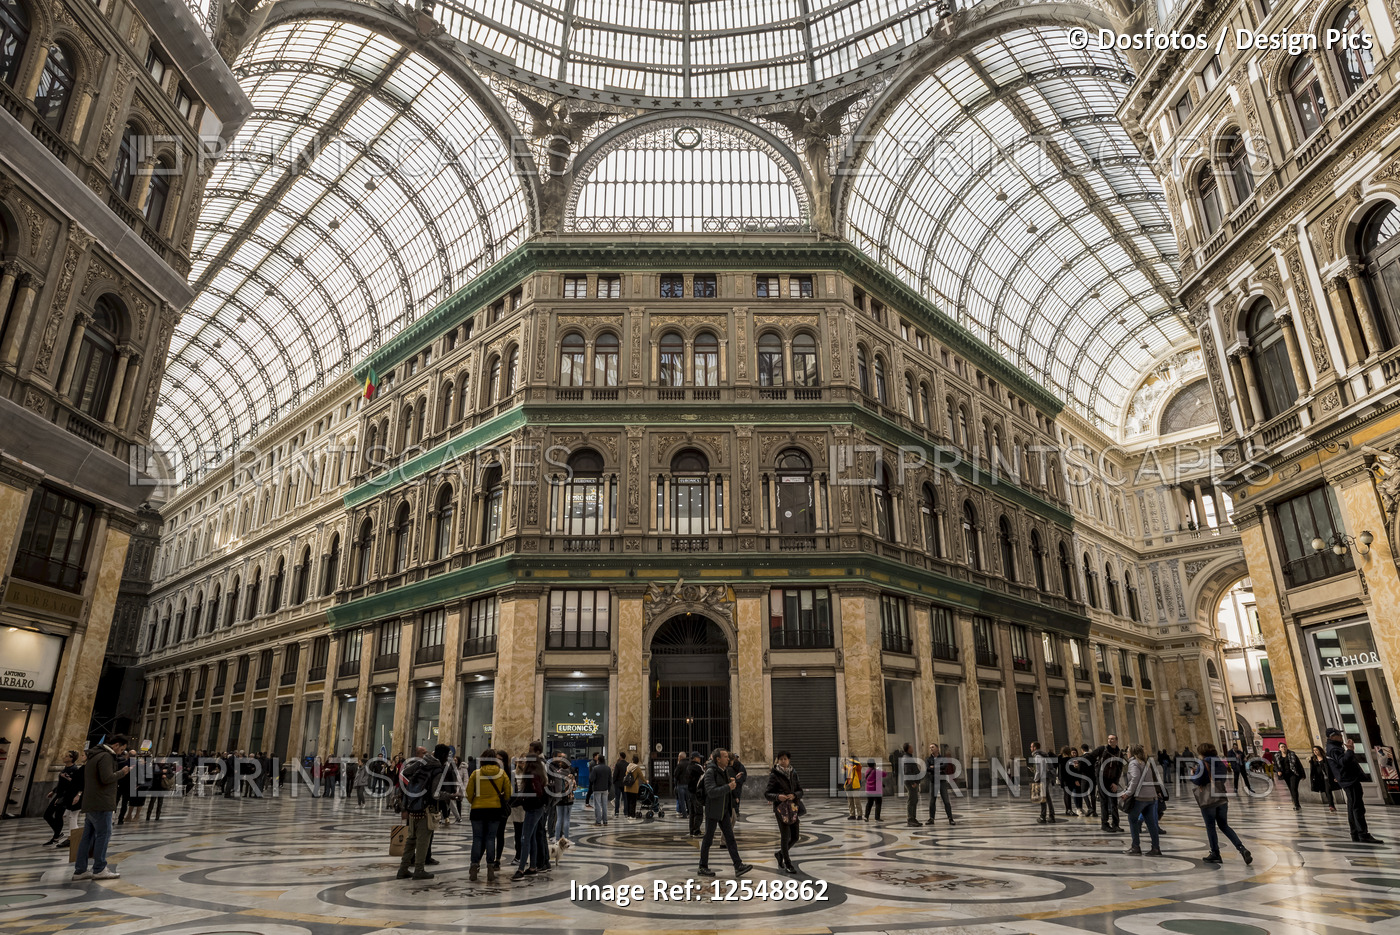 Galleria Umberto l, a public shopping gallery designed by Emanuele Rocco; ...